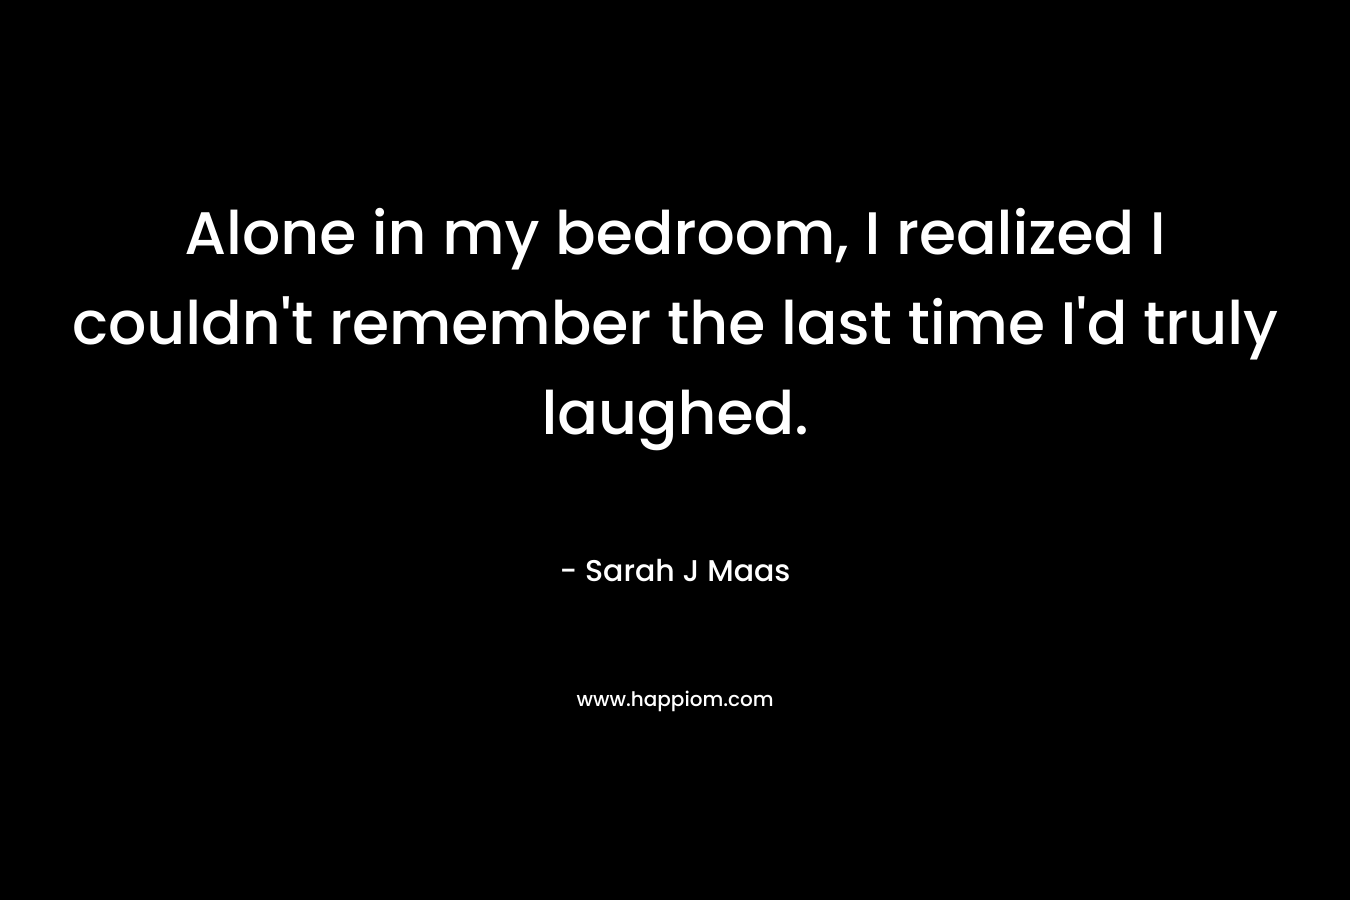 Alone in my bedroom, I realized I couldn't remember the last time I'd truly laughed.